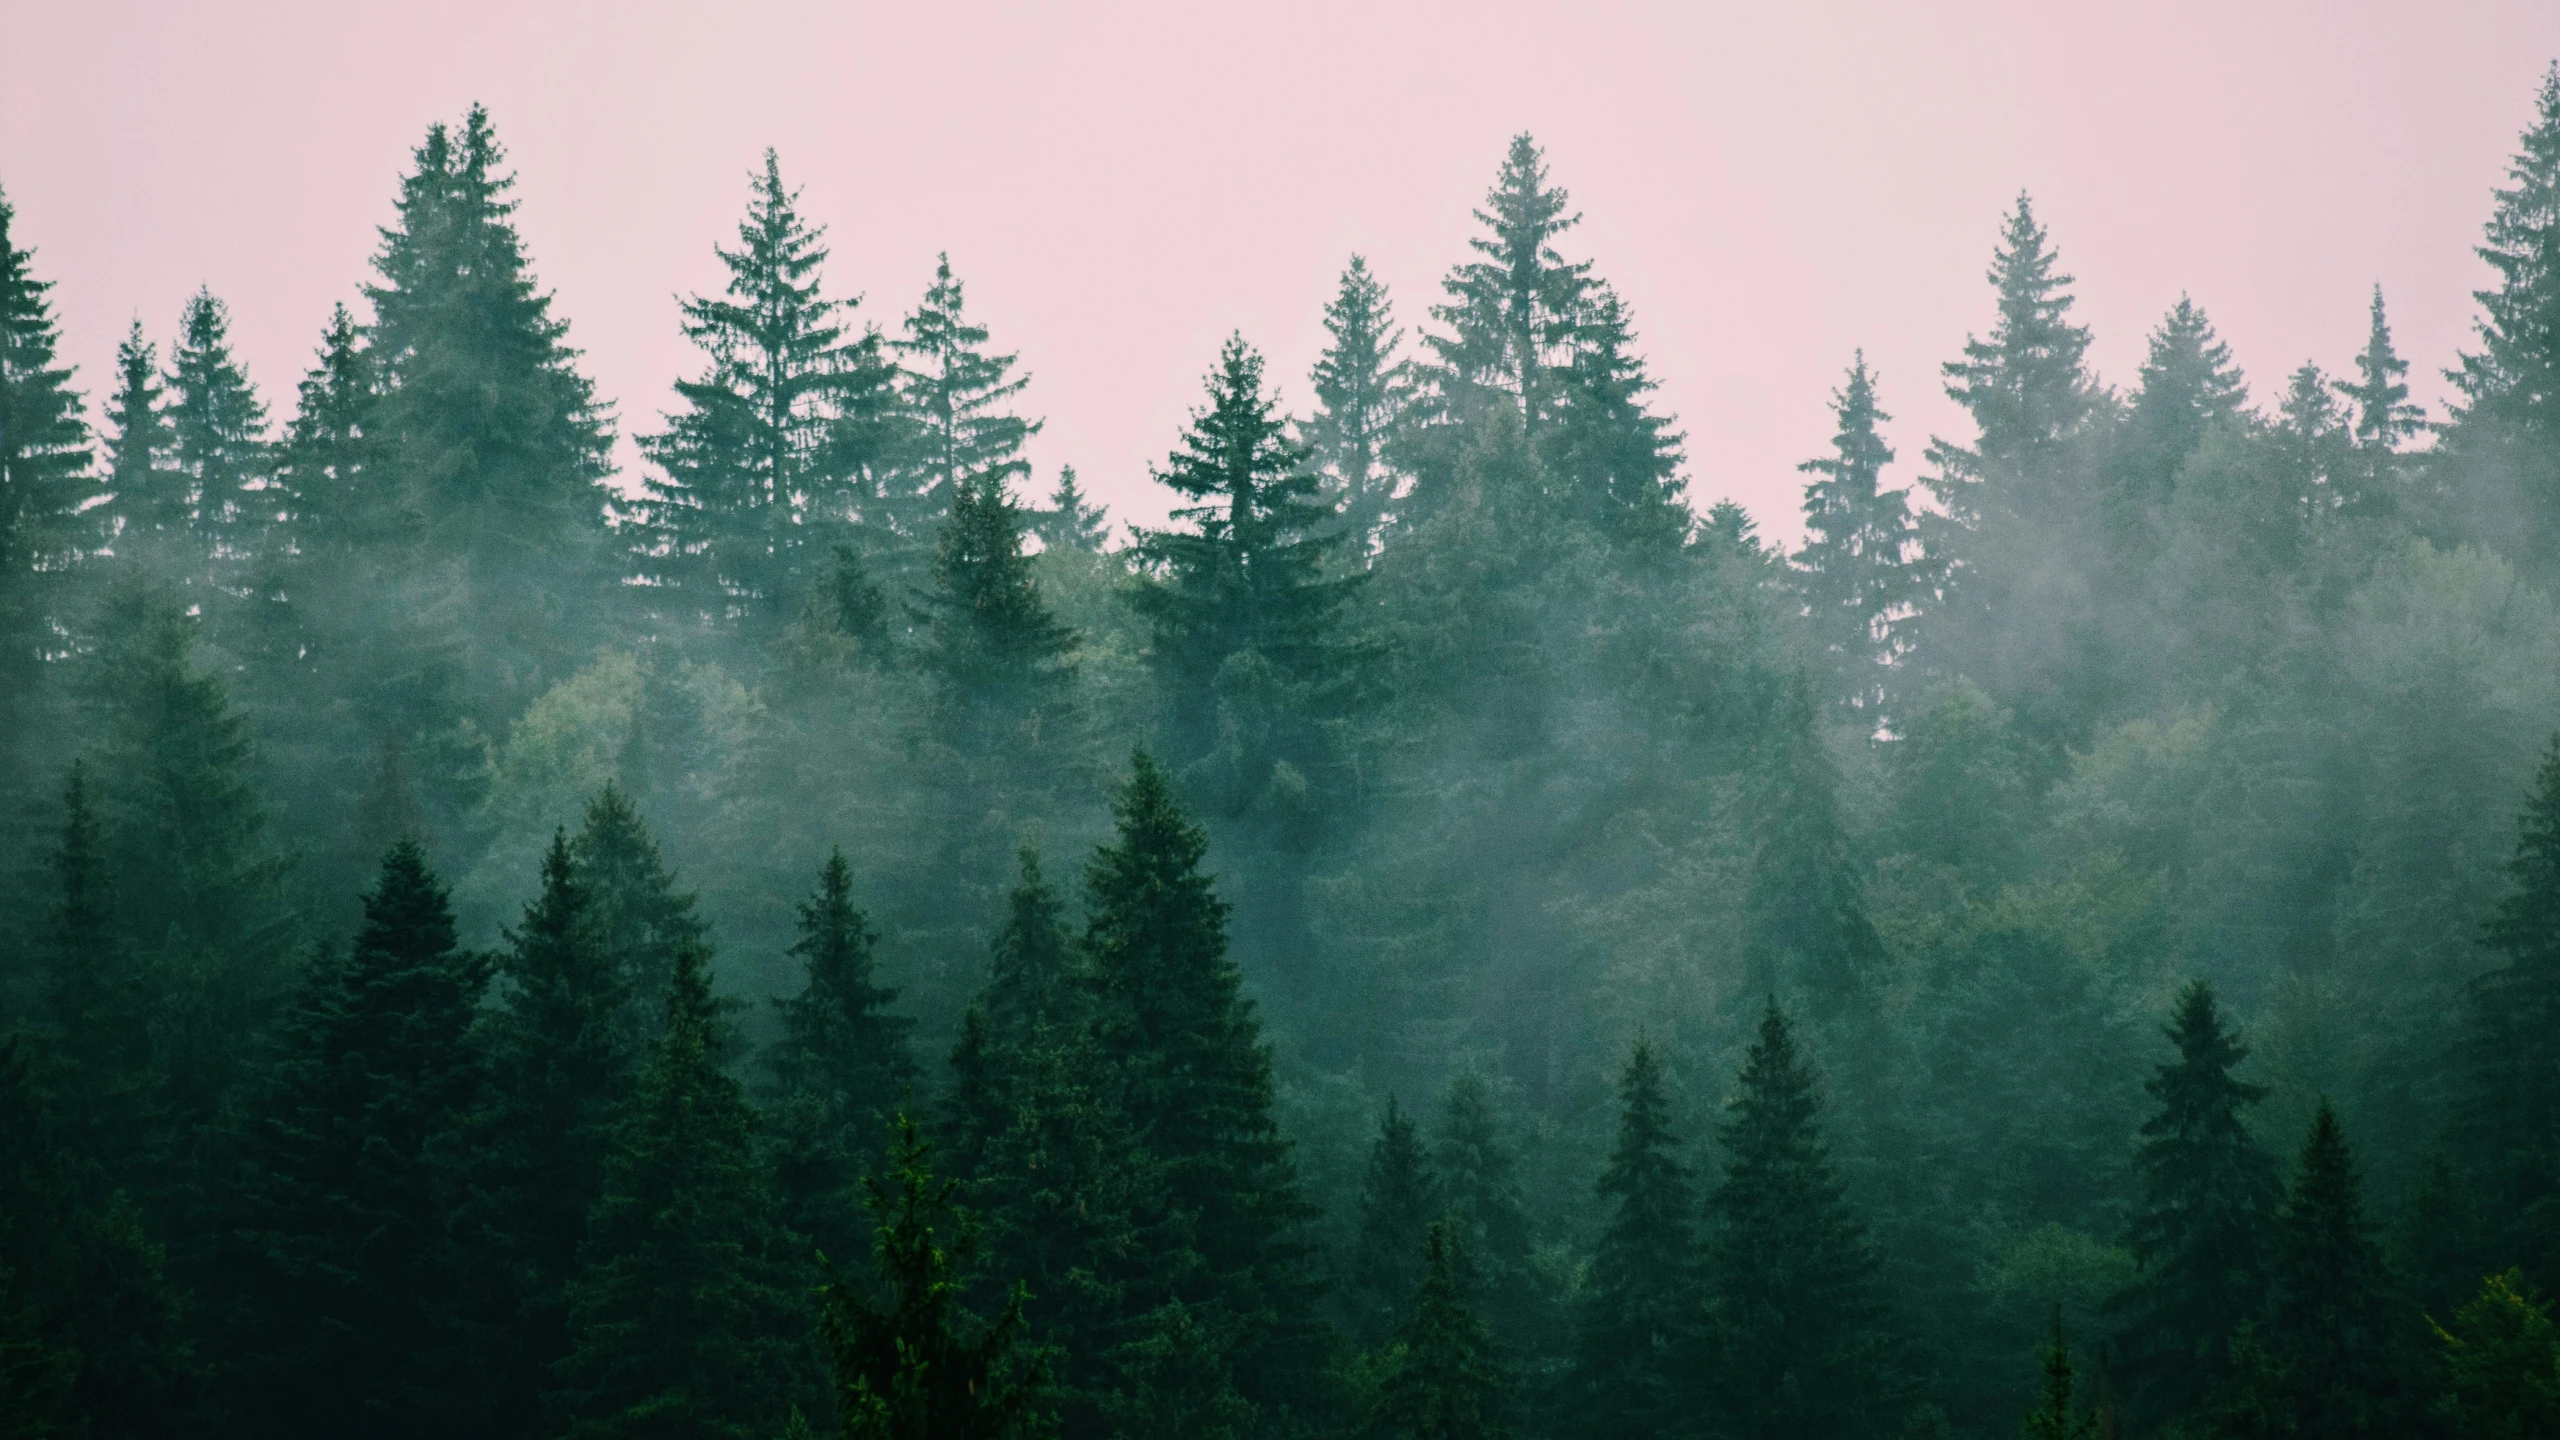 fog rises in the forest on a misty day